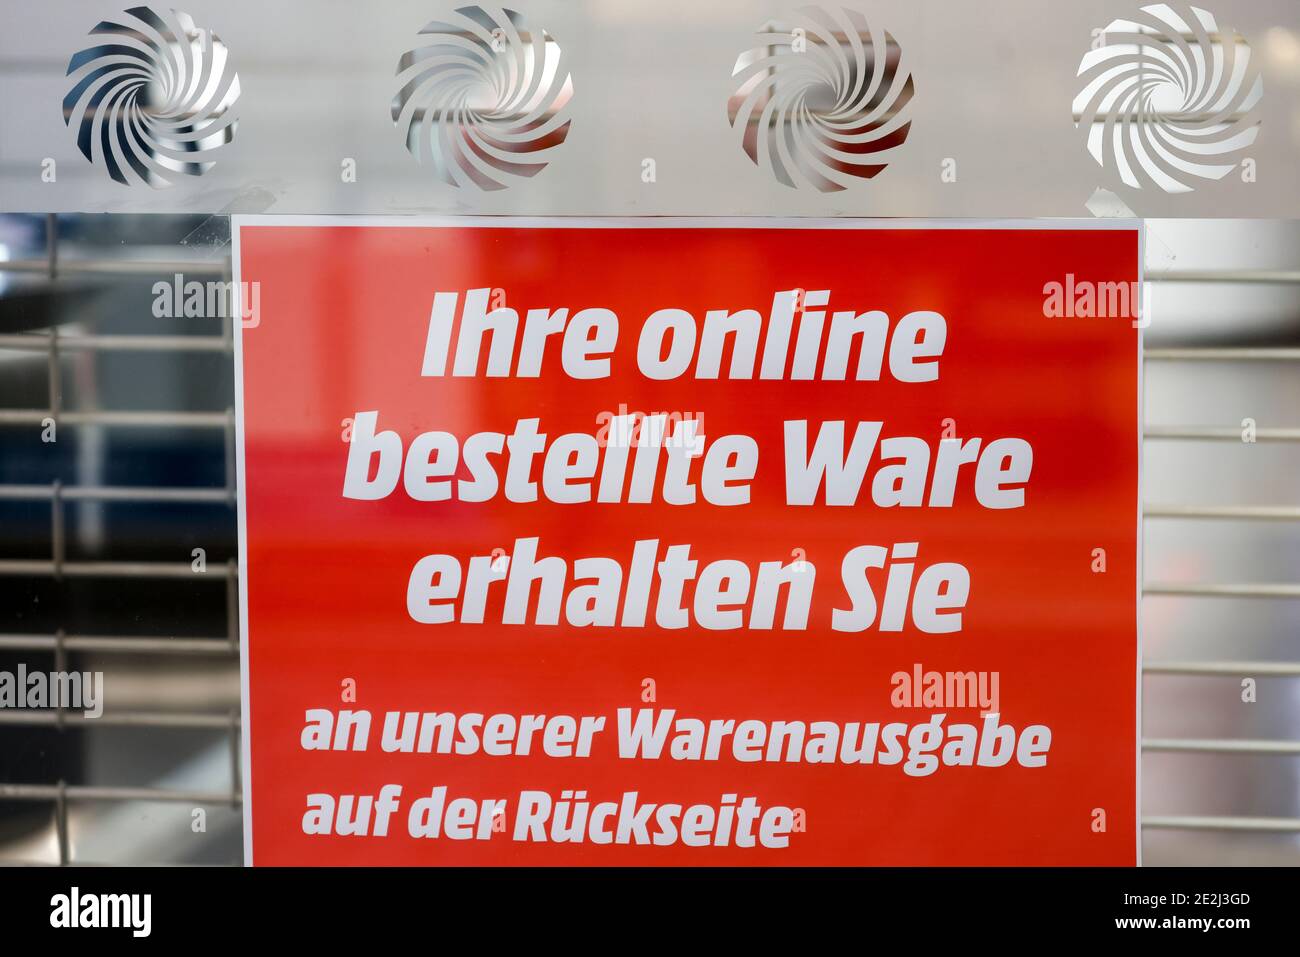 Cologne, North Rhine-Westphalia, Germany - Click and Collect, retail in times of Corona crisis at the second lockdown, stores are closed but offer pic Stock Photo